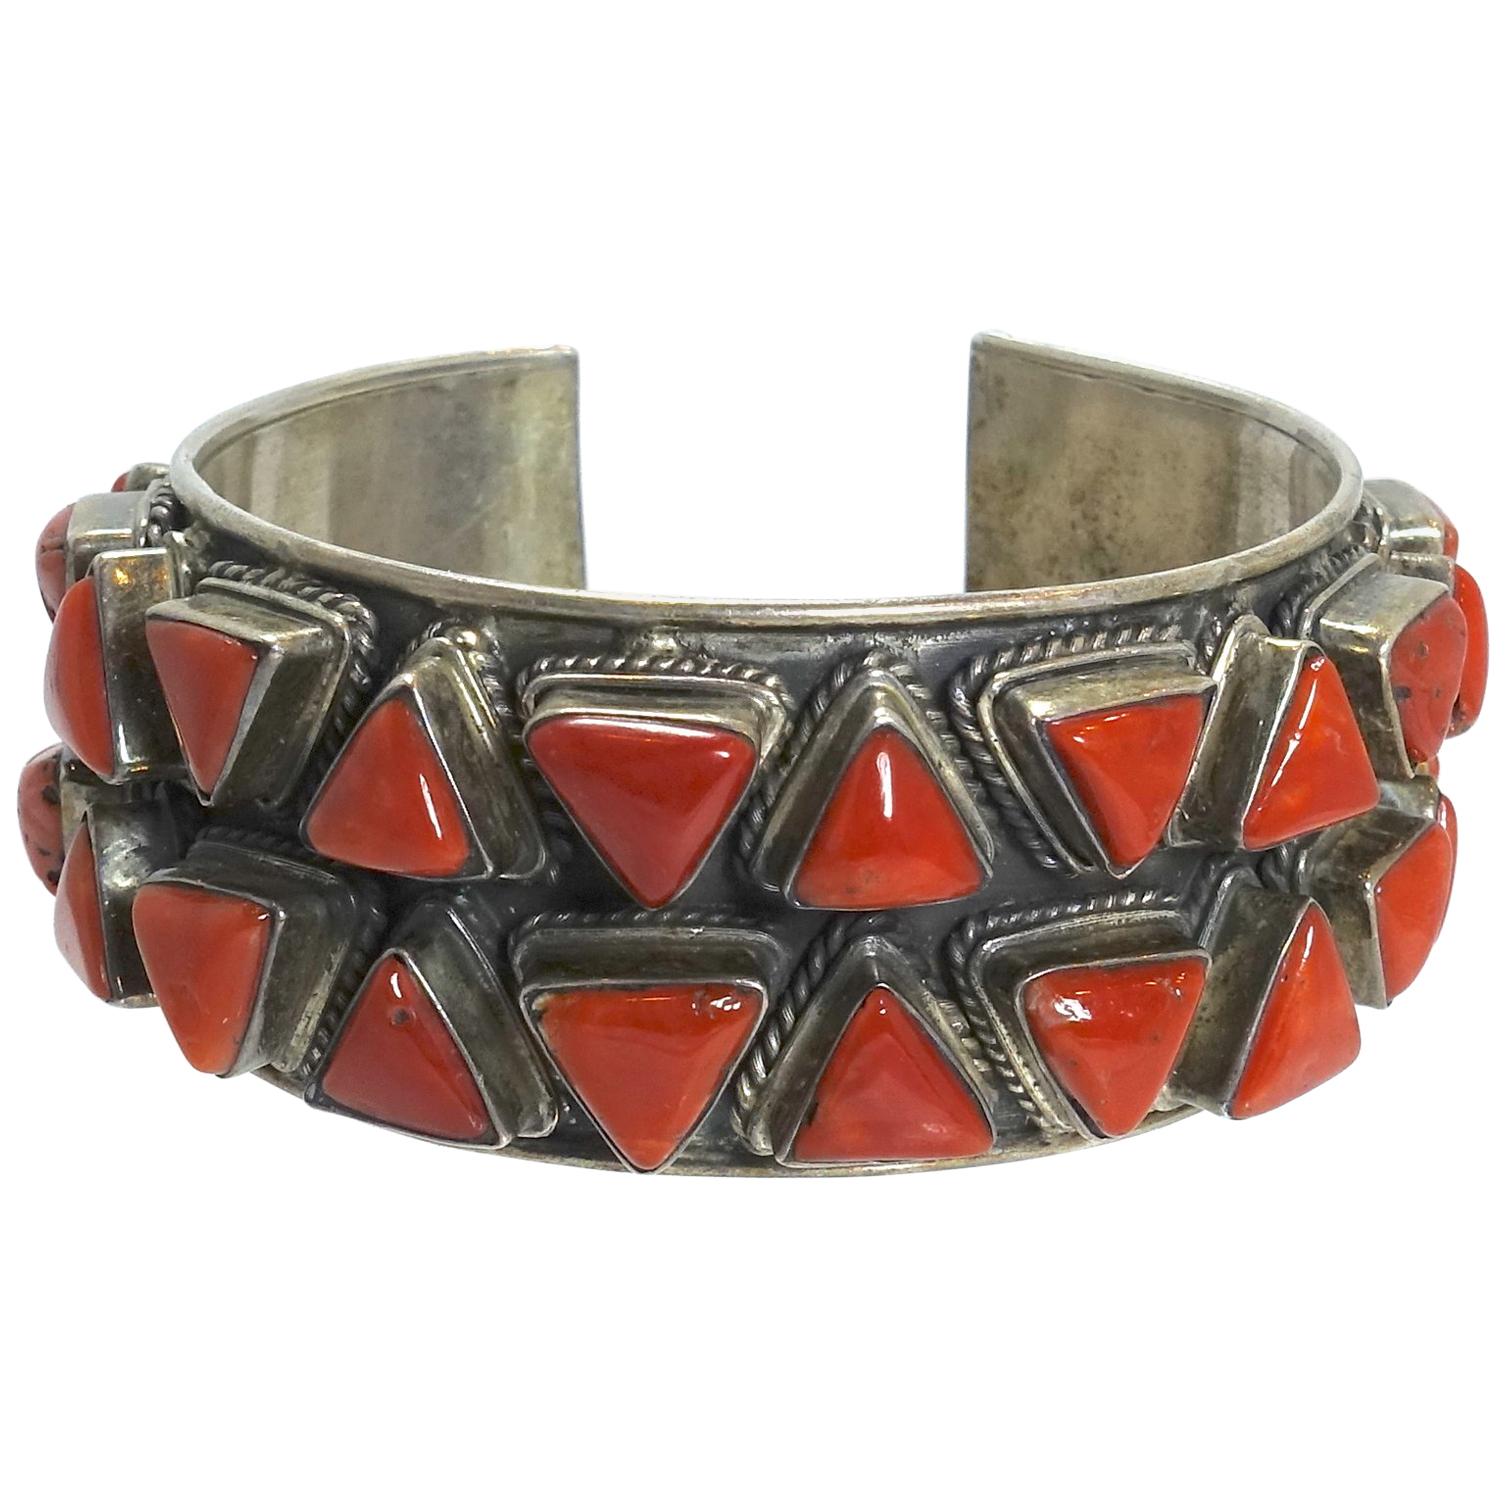 Vintage Early Zuni Pawn American Indian Blood Coral & Sterling Cuff Bracelet For Sale